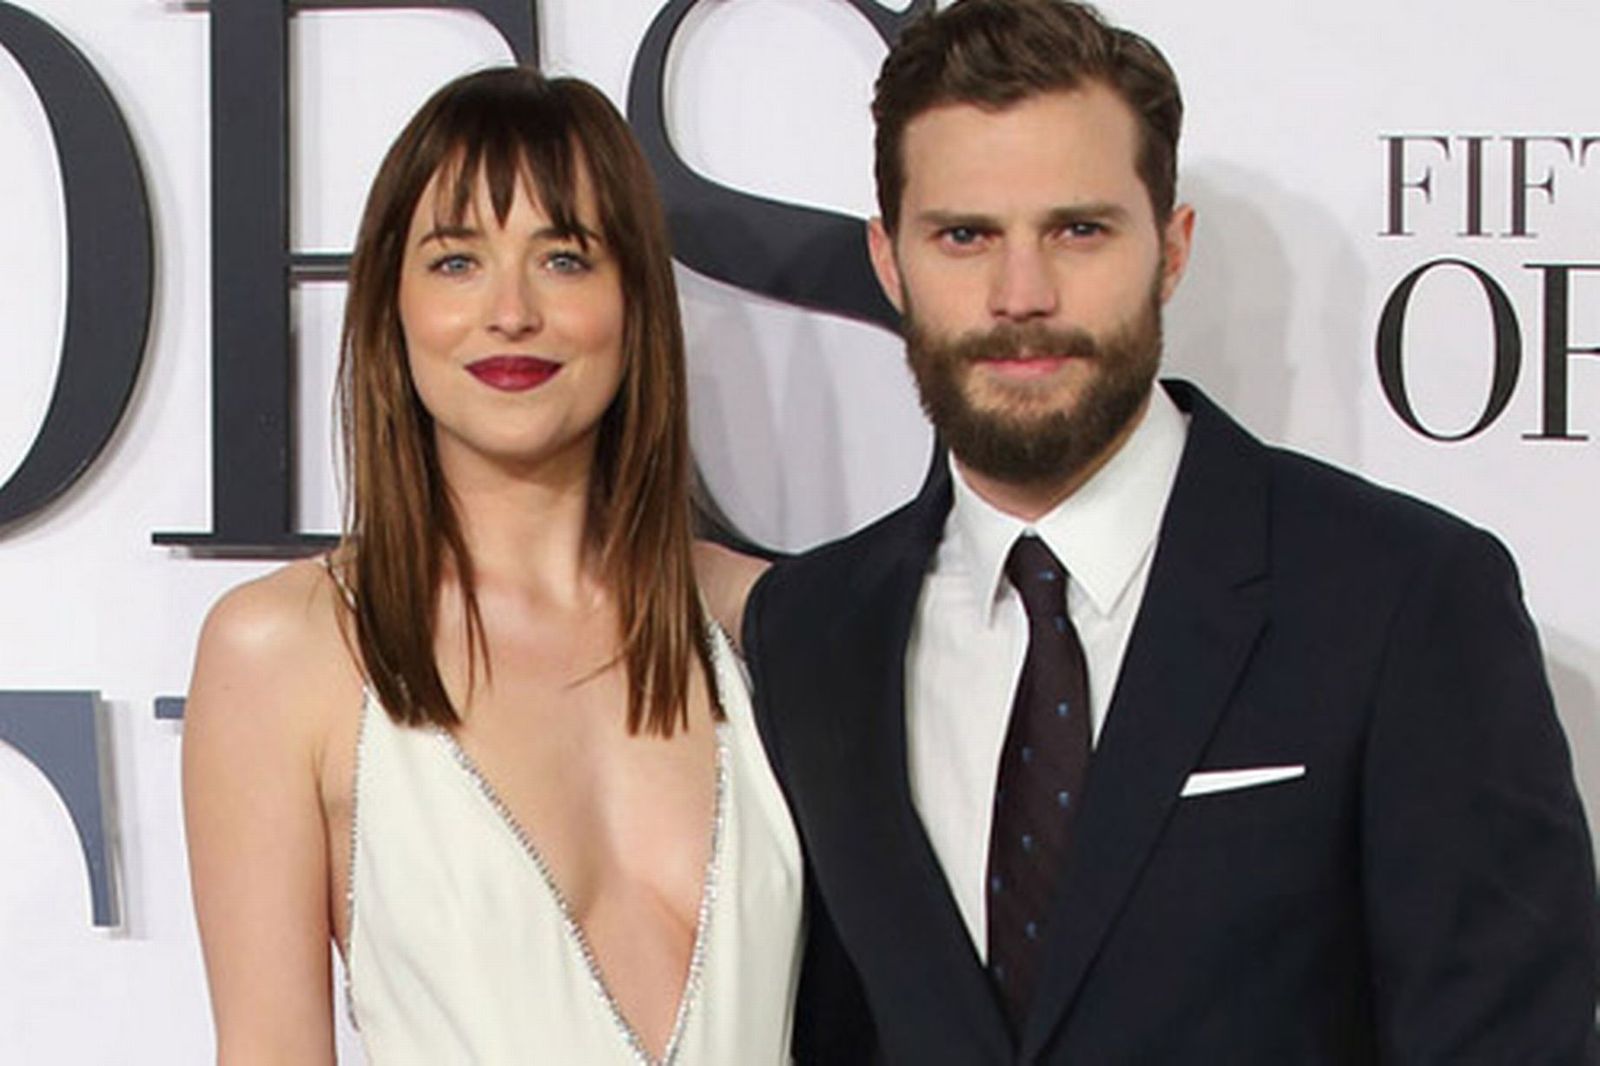 Fifty Shades Darker to be a thriller